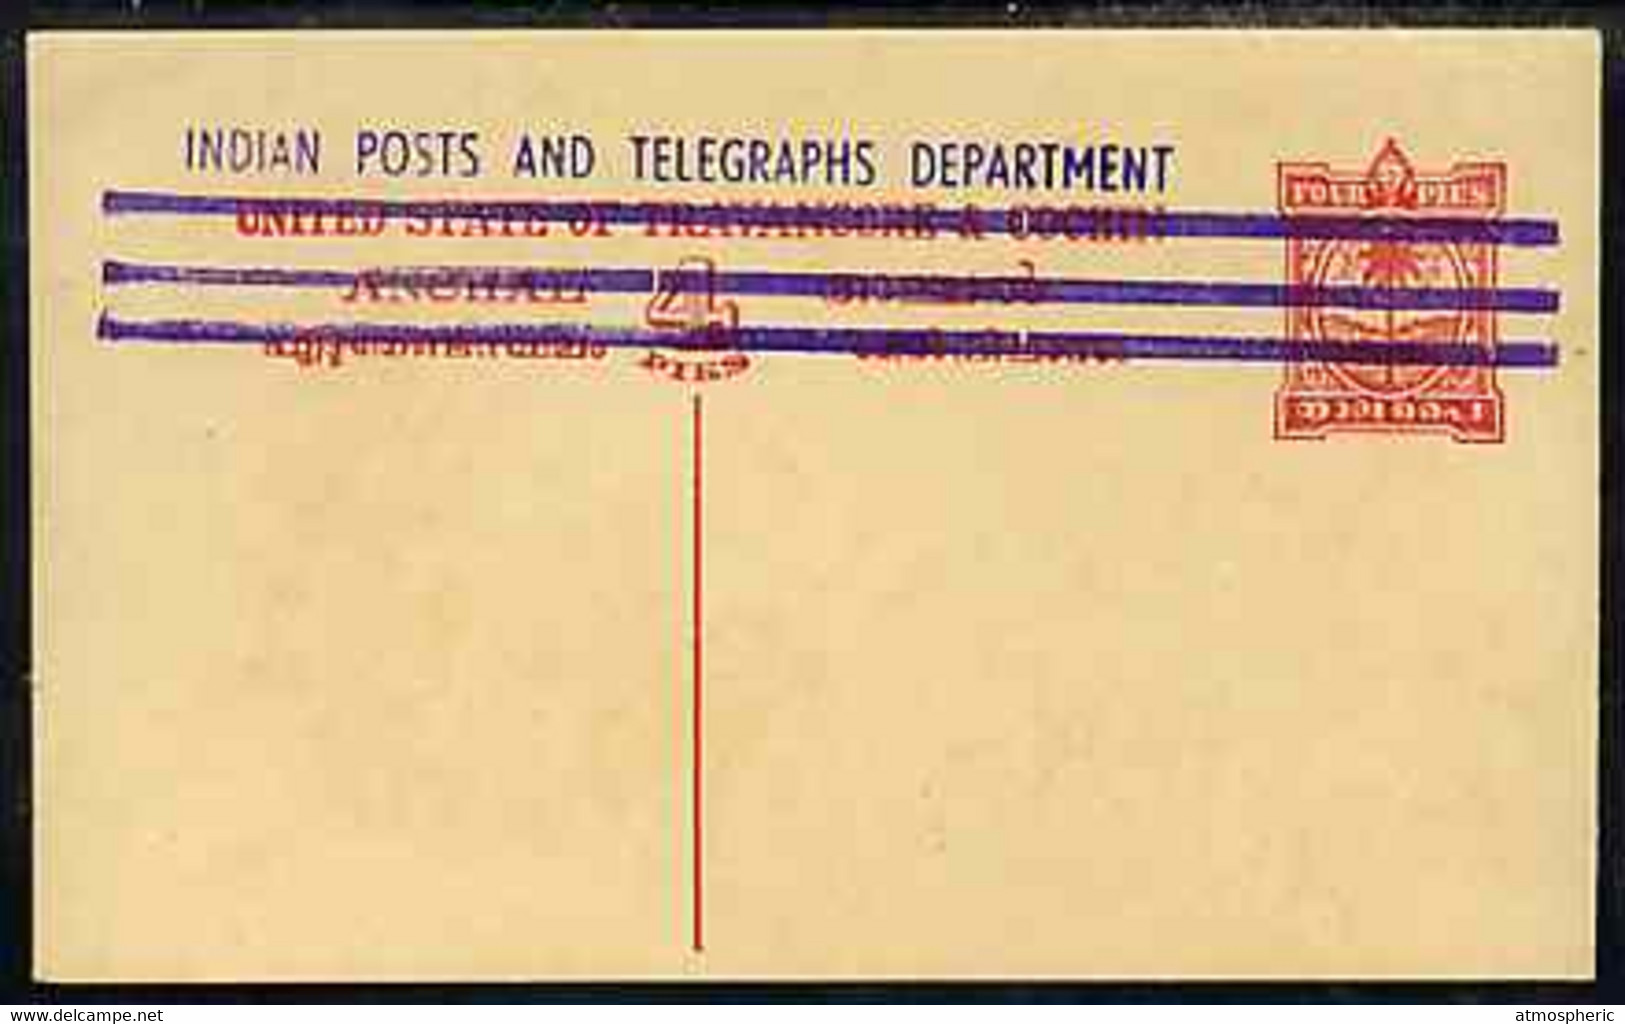 Indian States - Travancore-Cochin 1950c 4 Pies P/stat Card (Palm Tree) As H & G 3 But Handstamped 'Indian Posts And Tele - Travancore-Cochin